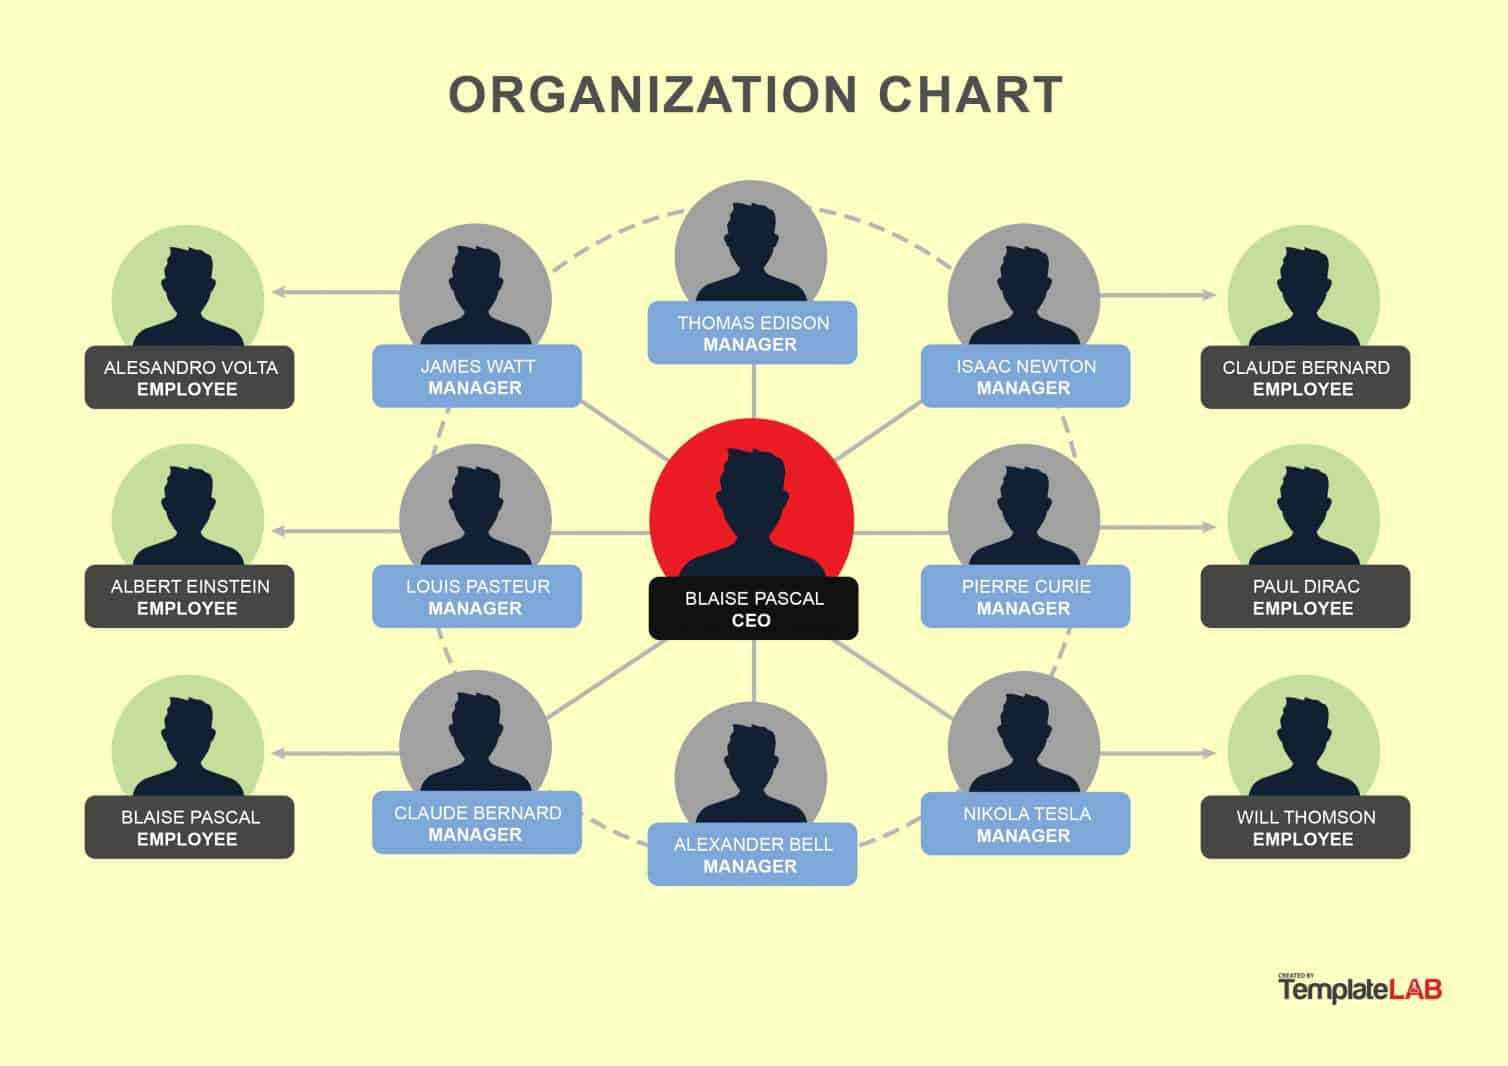 40 Organizational Chart Templates (Word, Excel, Powerpoint) Intended For Organization Chart Template Word